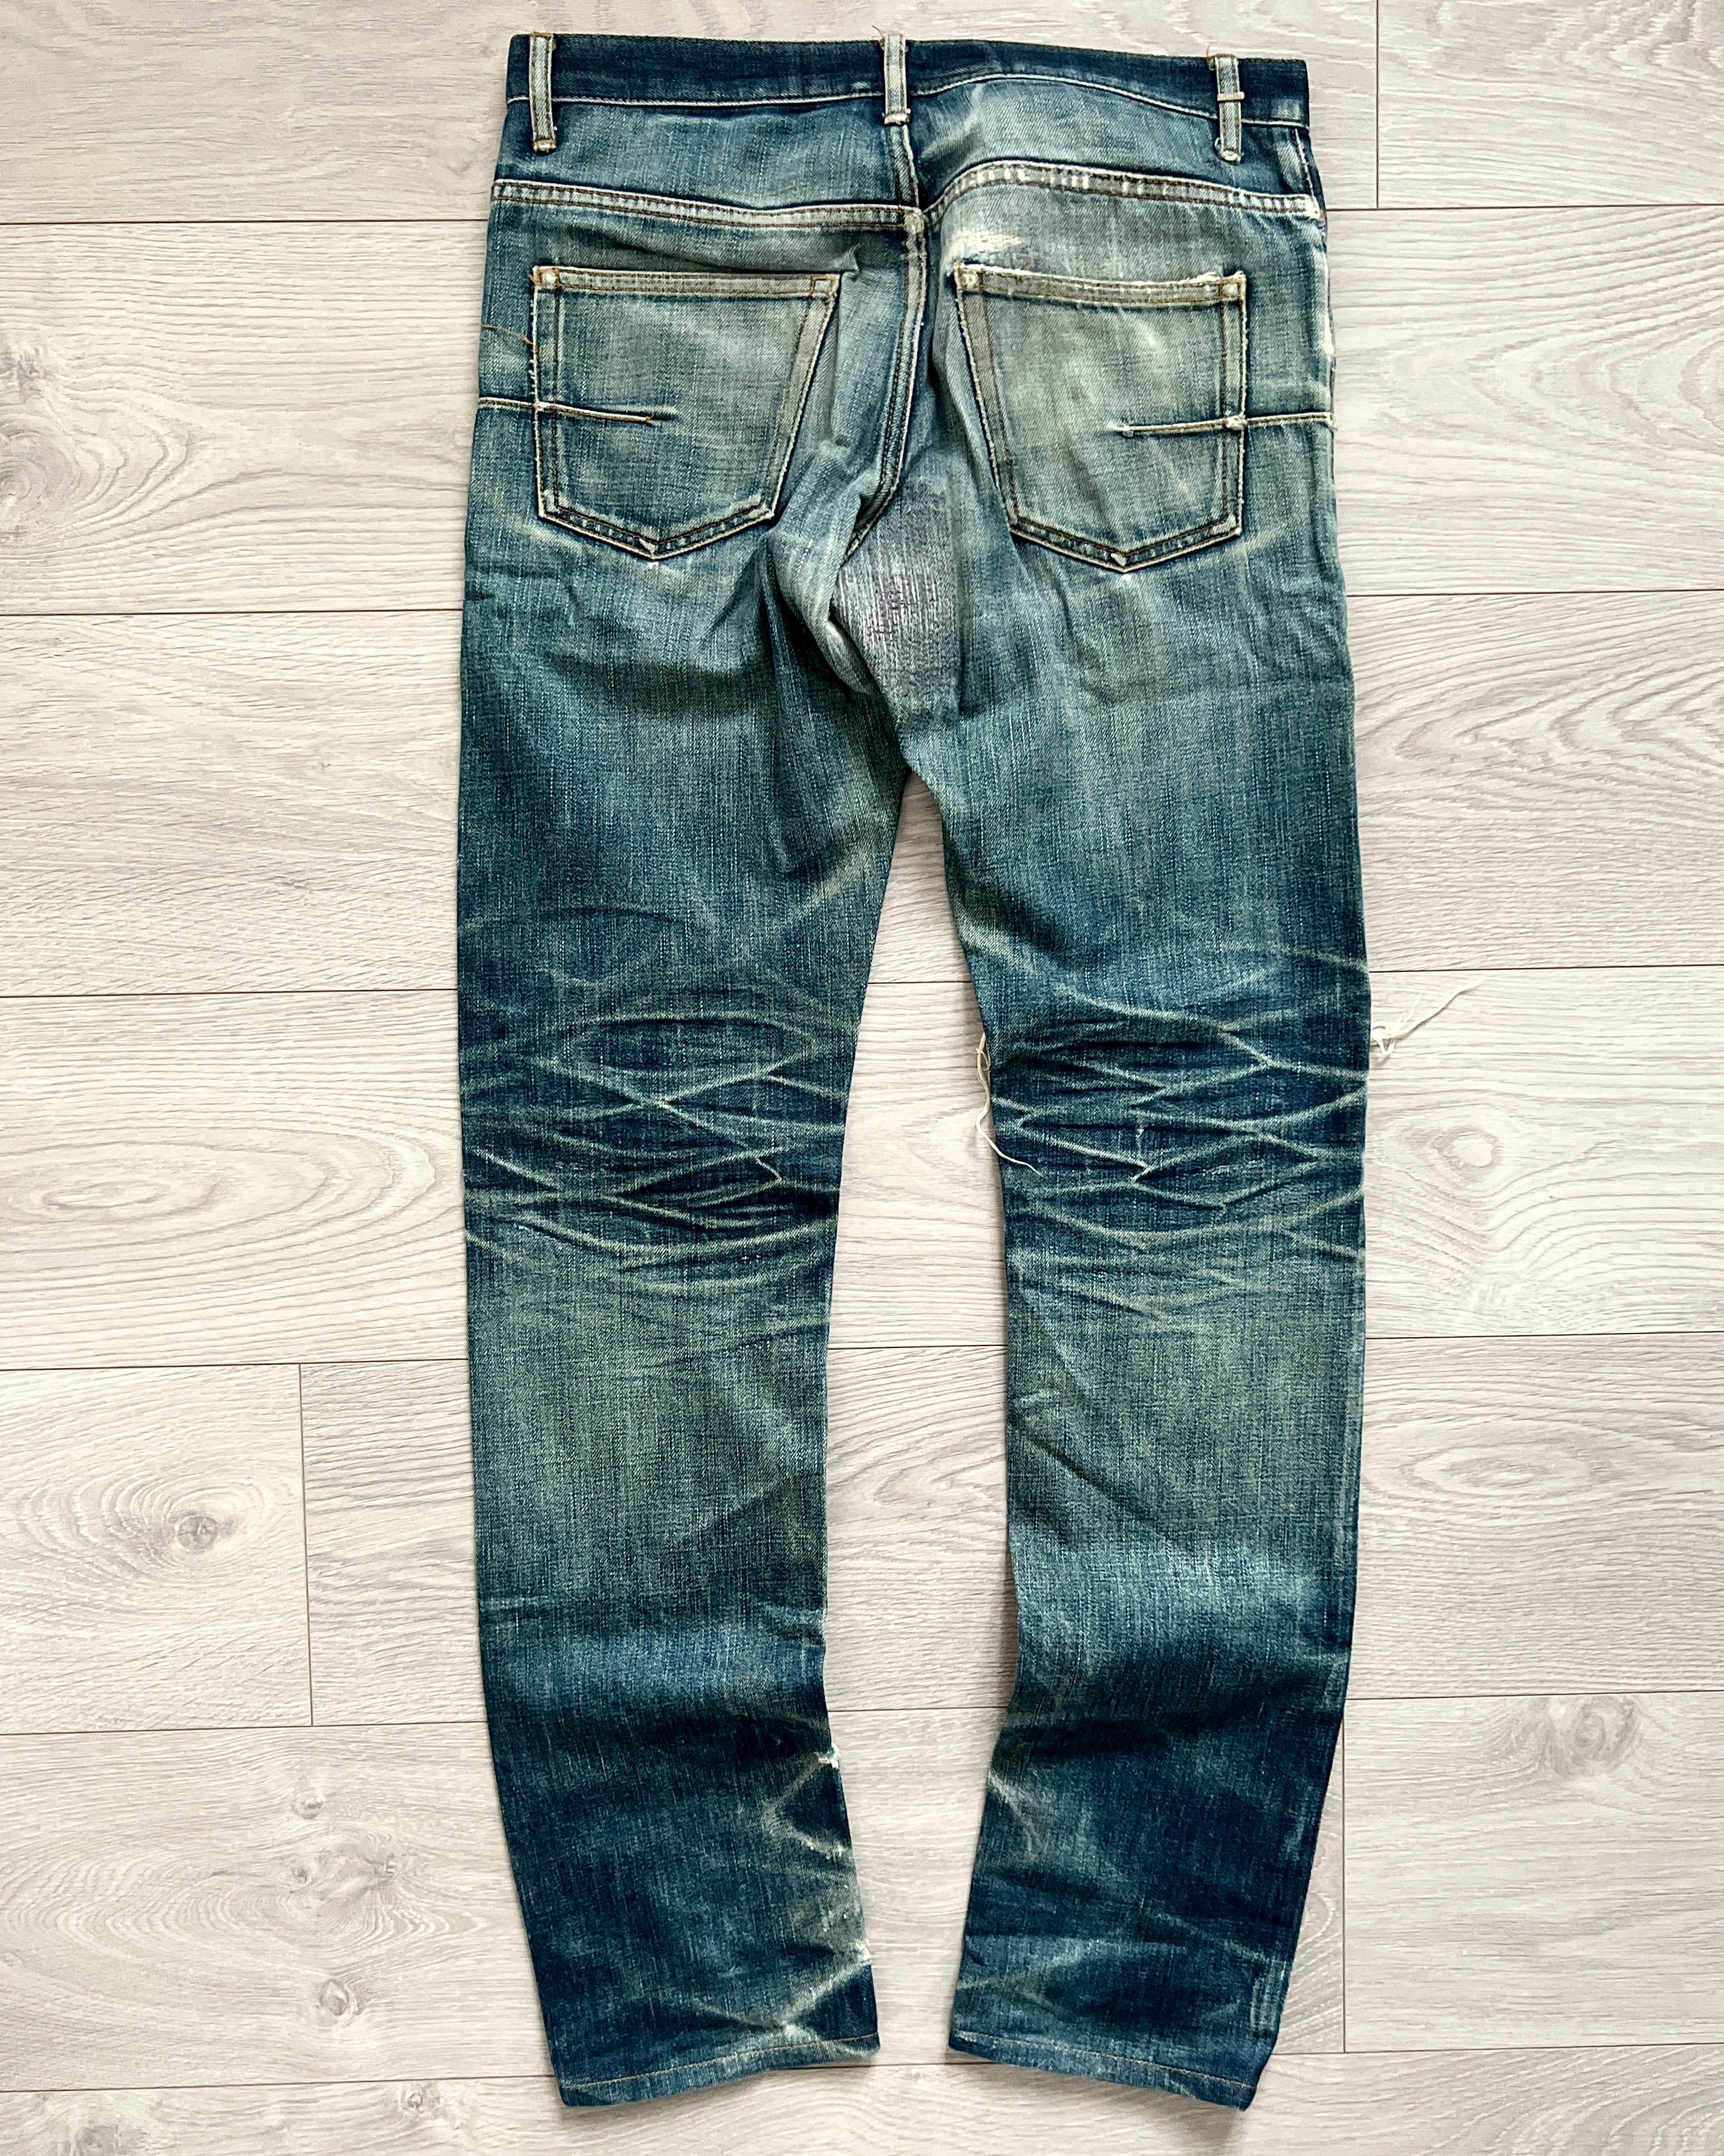 Dior Homme by Hedi Slimane AW2004 Denim Jeans - Size 29 